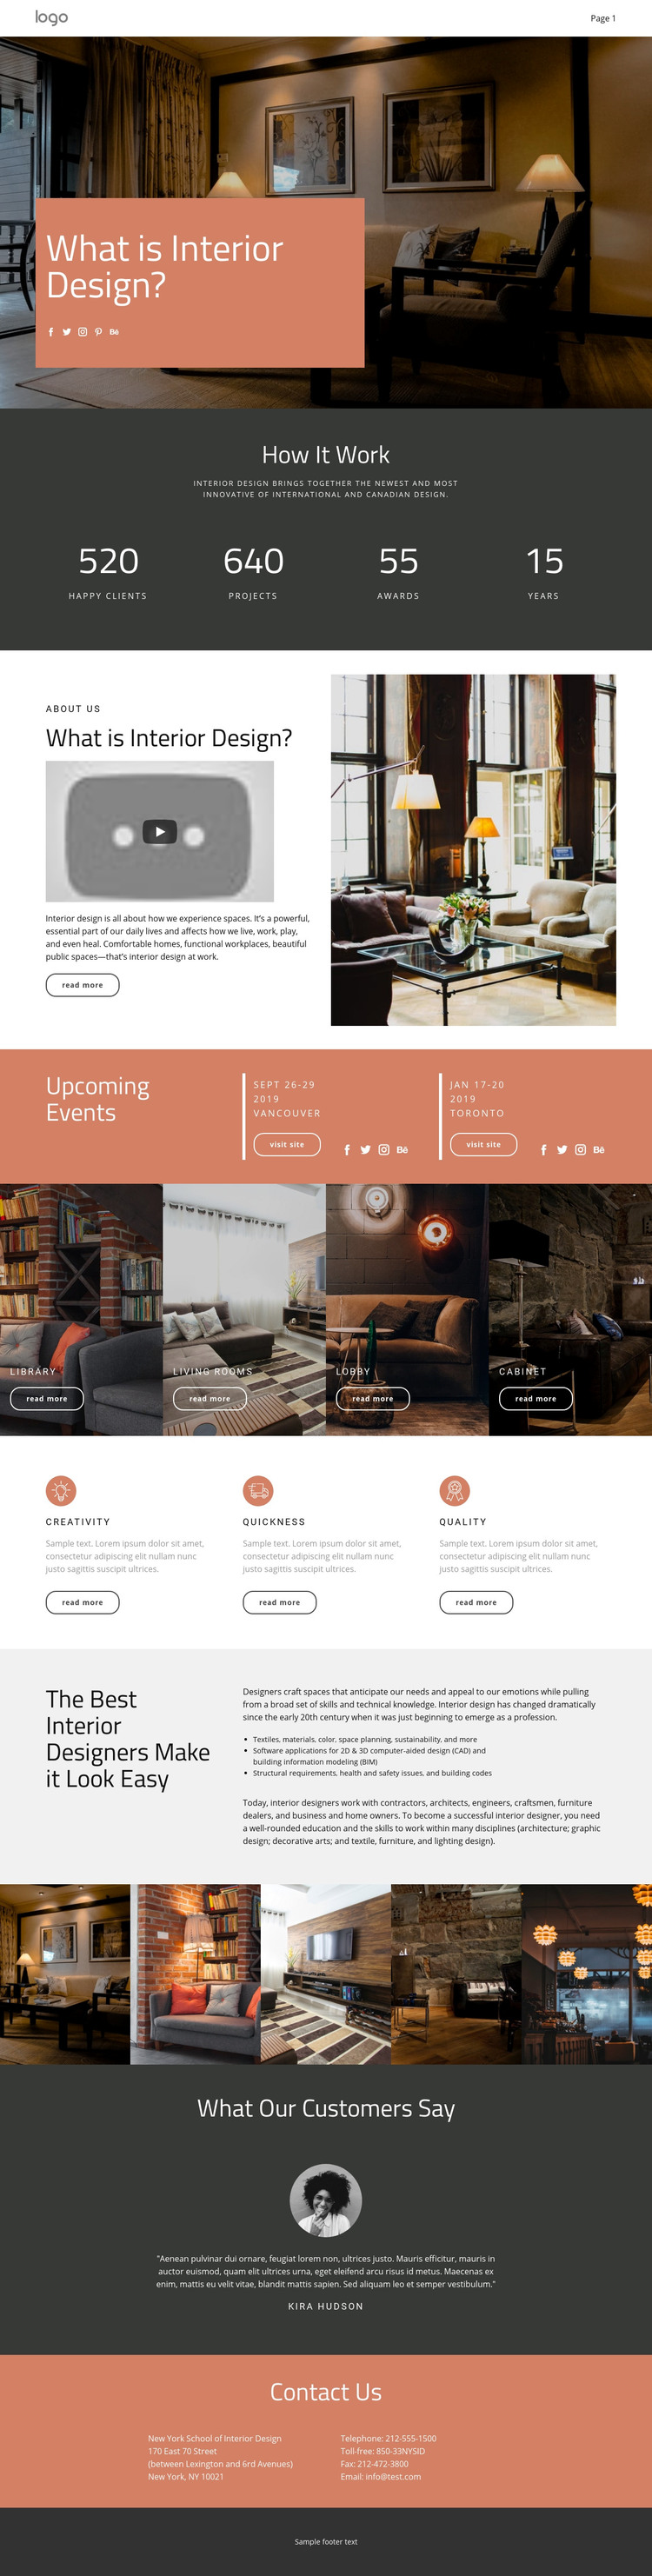 Design of houses and apartments Homepage Design